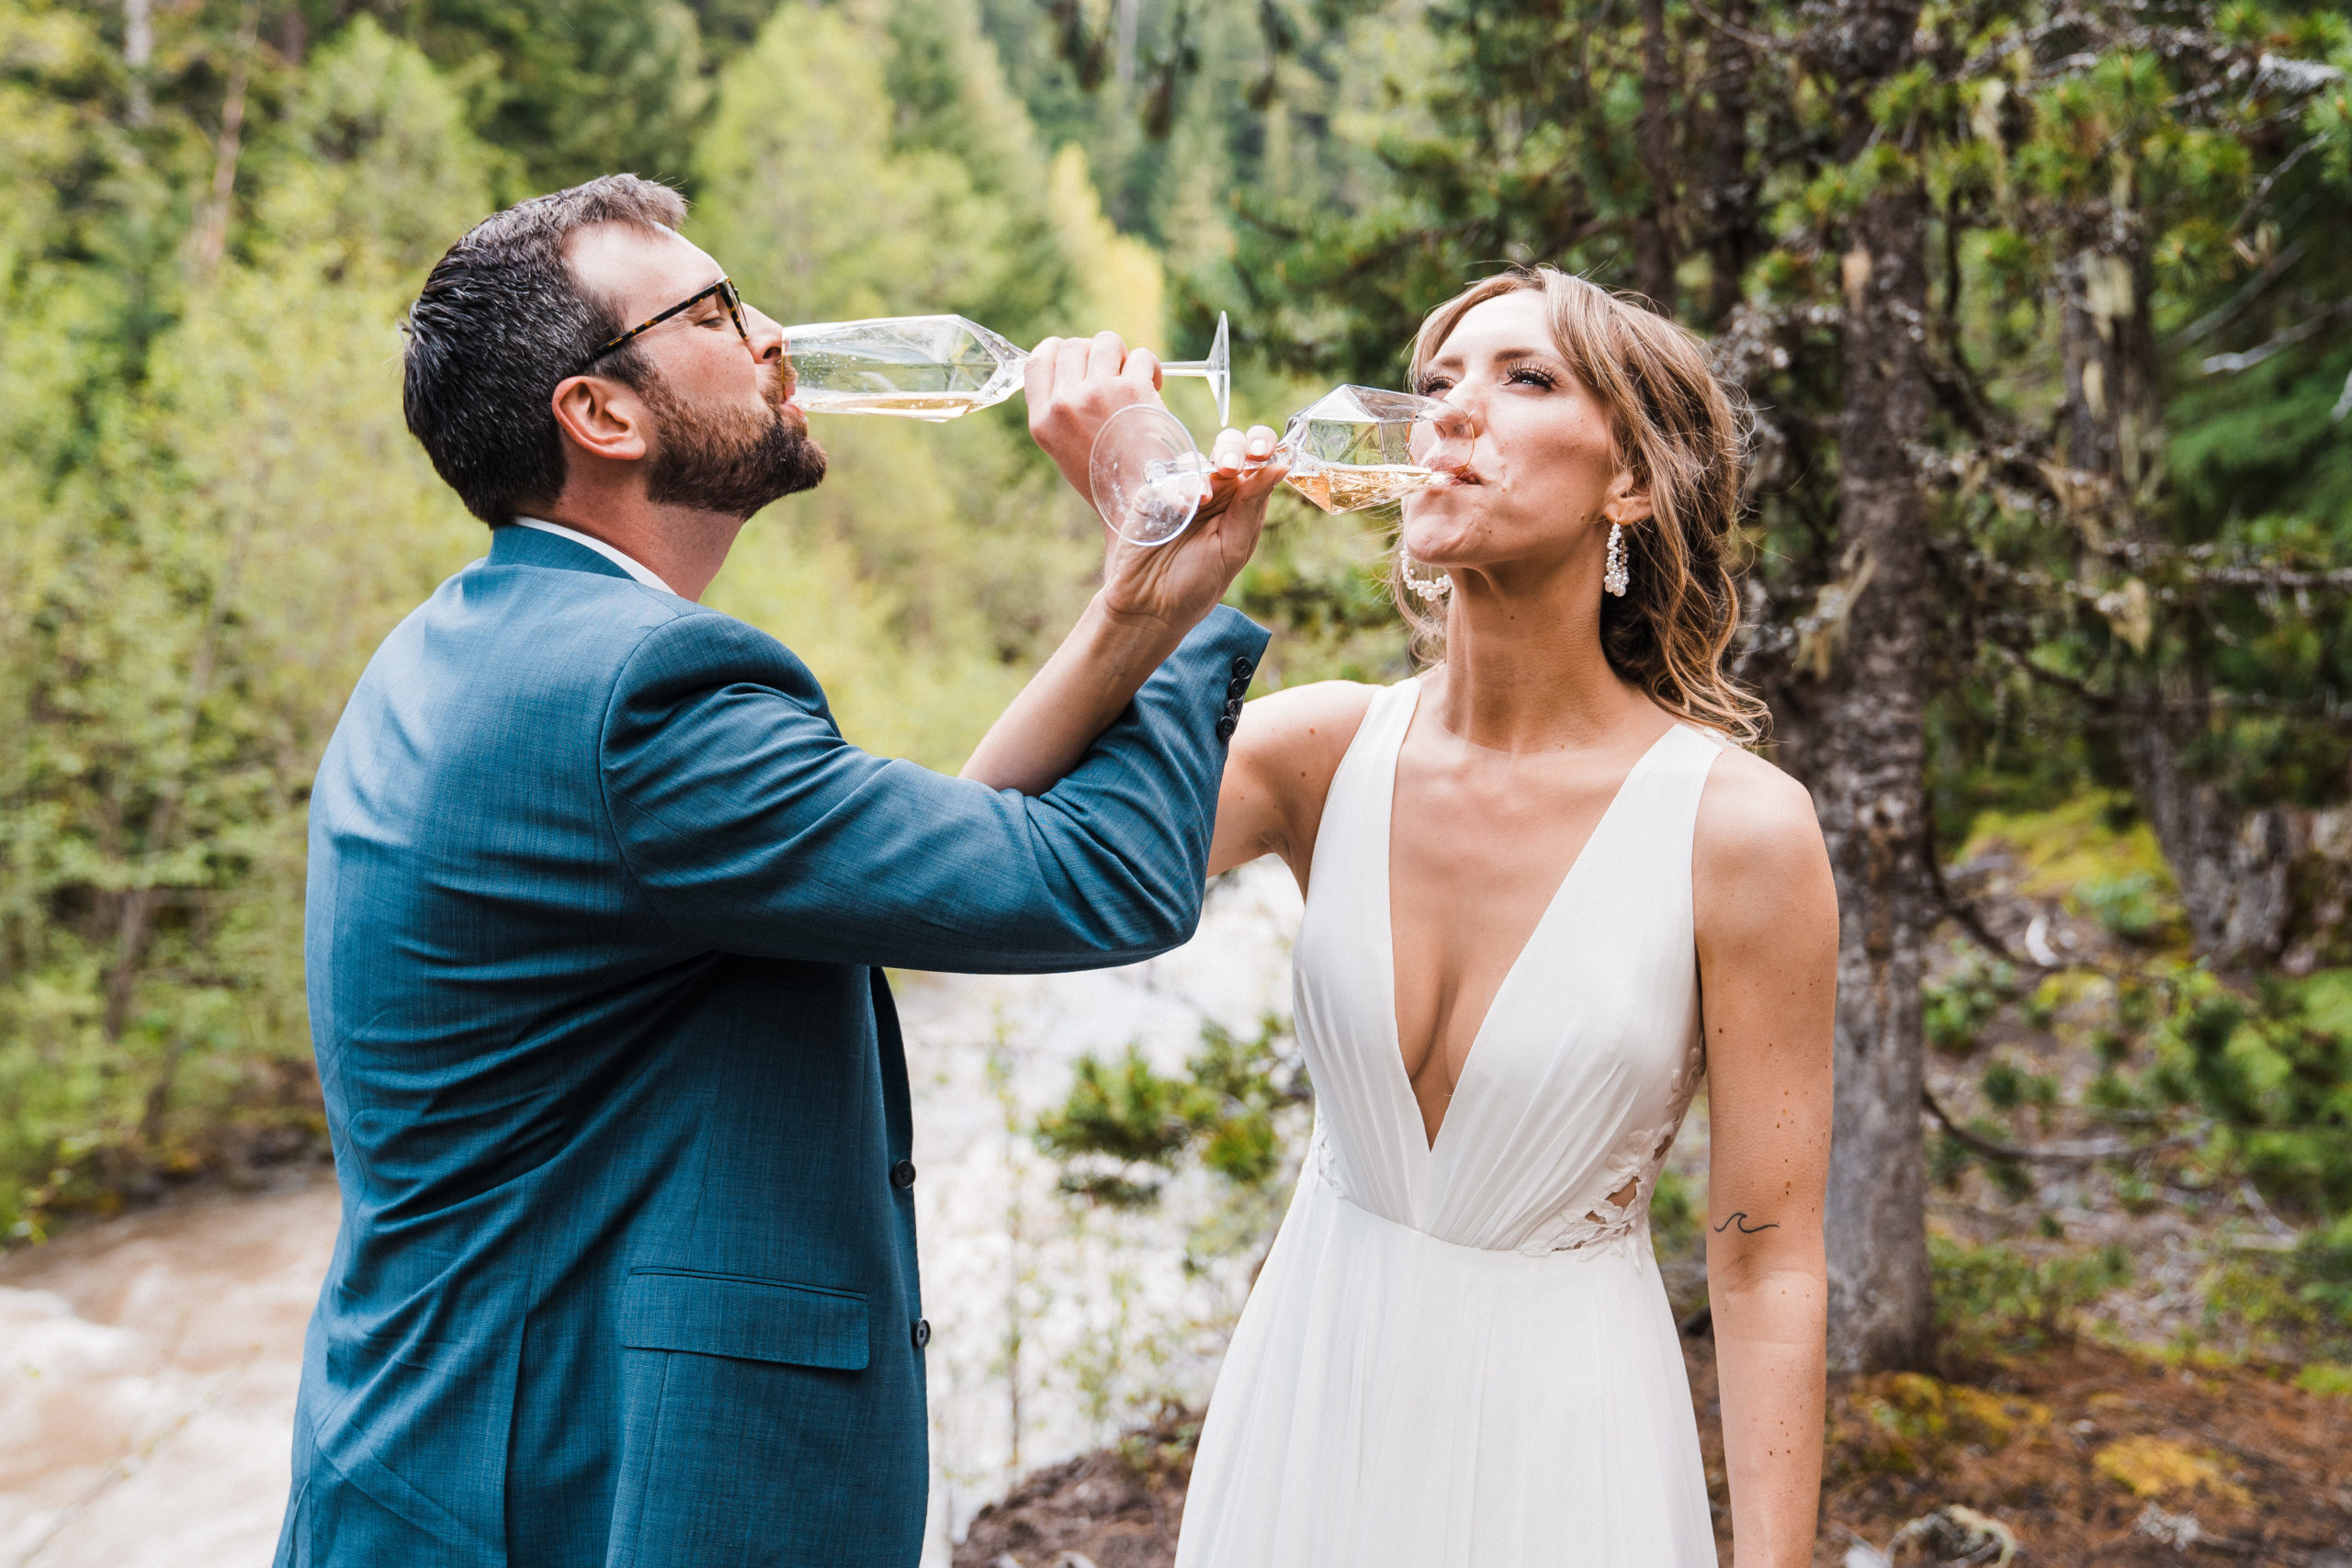 Bride and groom drinking champagne in the forest during hiking wedding